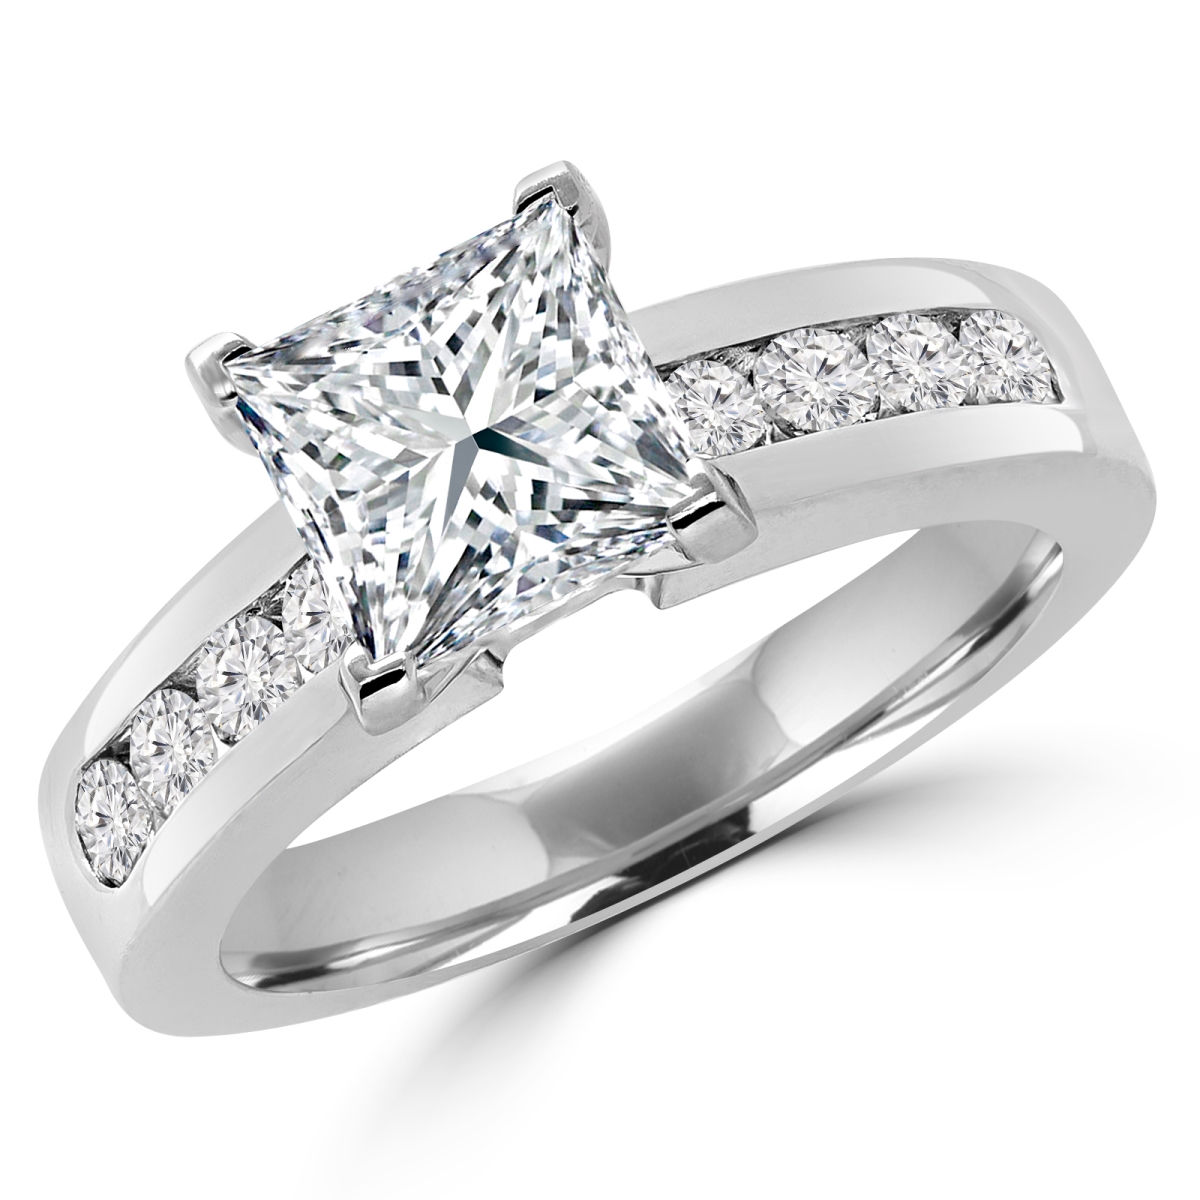 Picture of Majesty Diamonds MD180108-P 1.5 CTW Princess Diamond Solitaire with Accents Engagement Ring in 14K White Gold